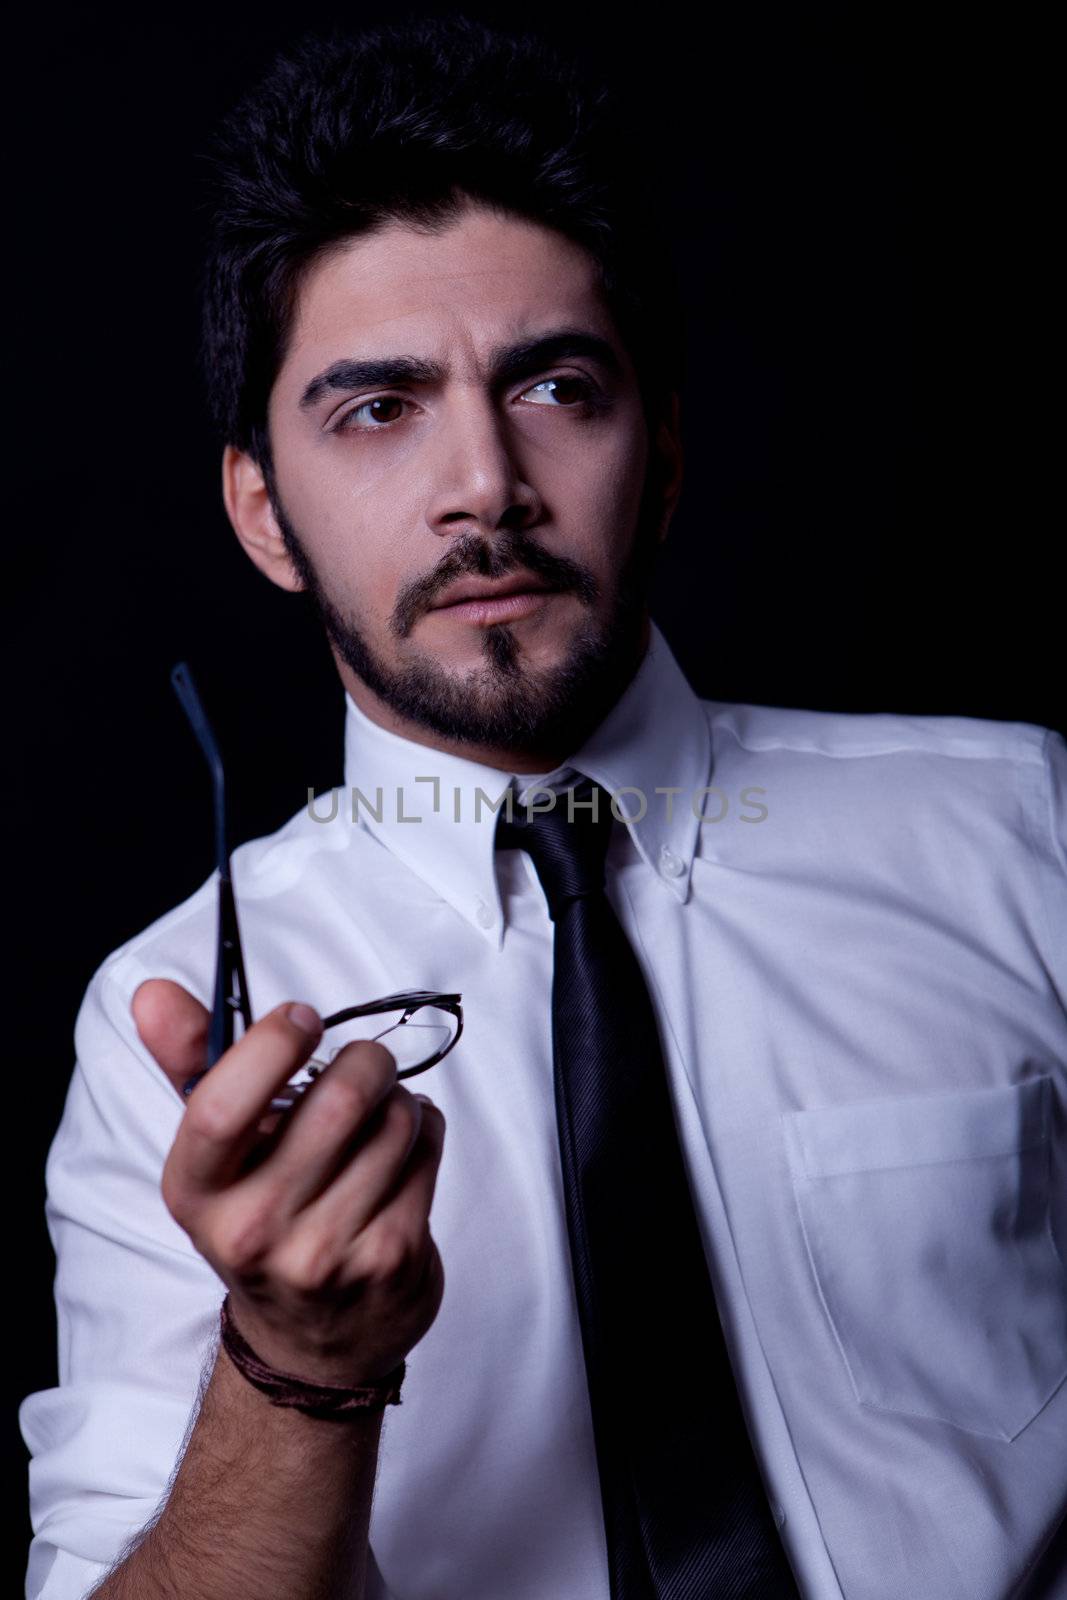 young successful business man with a suit isolated on black background